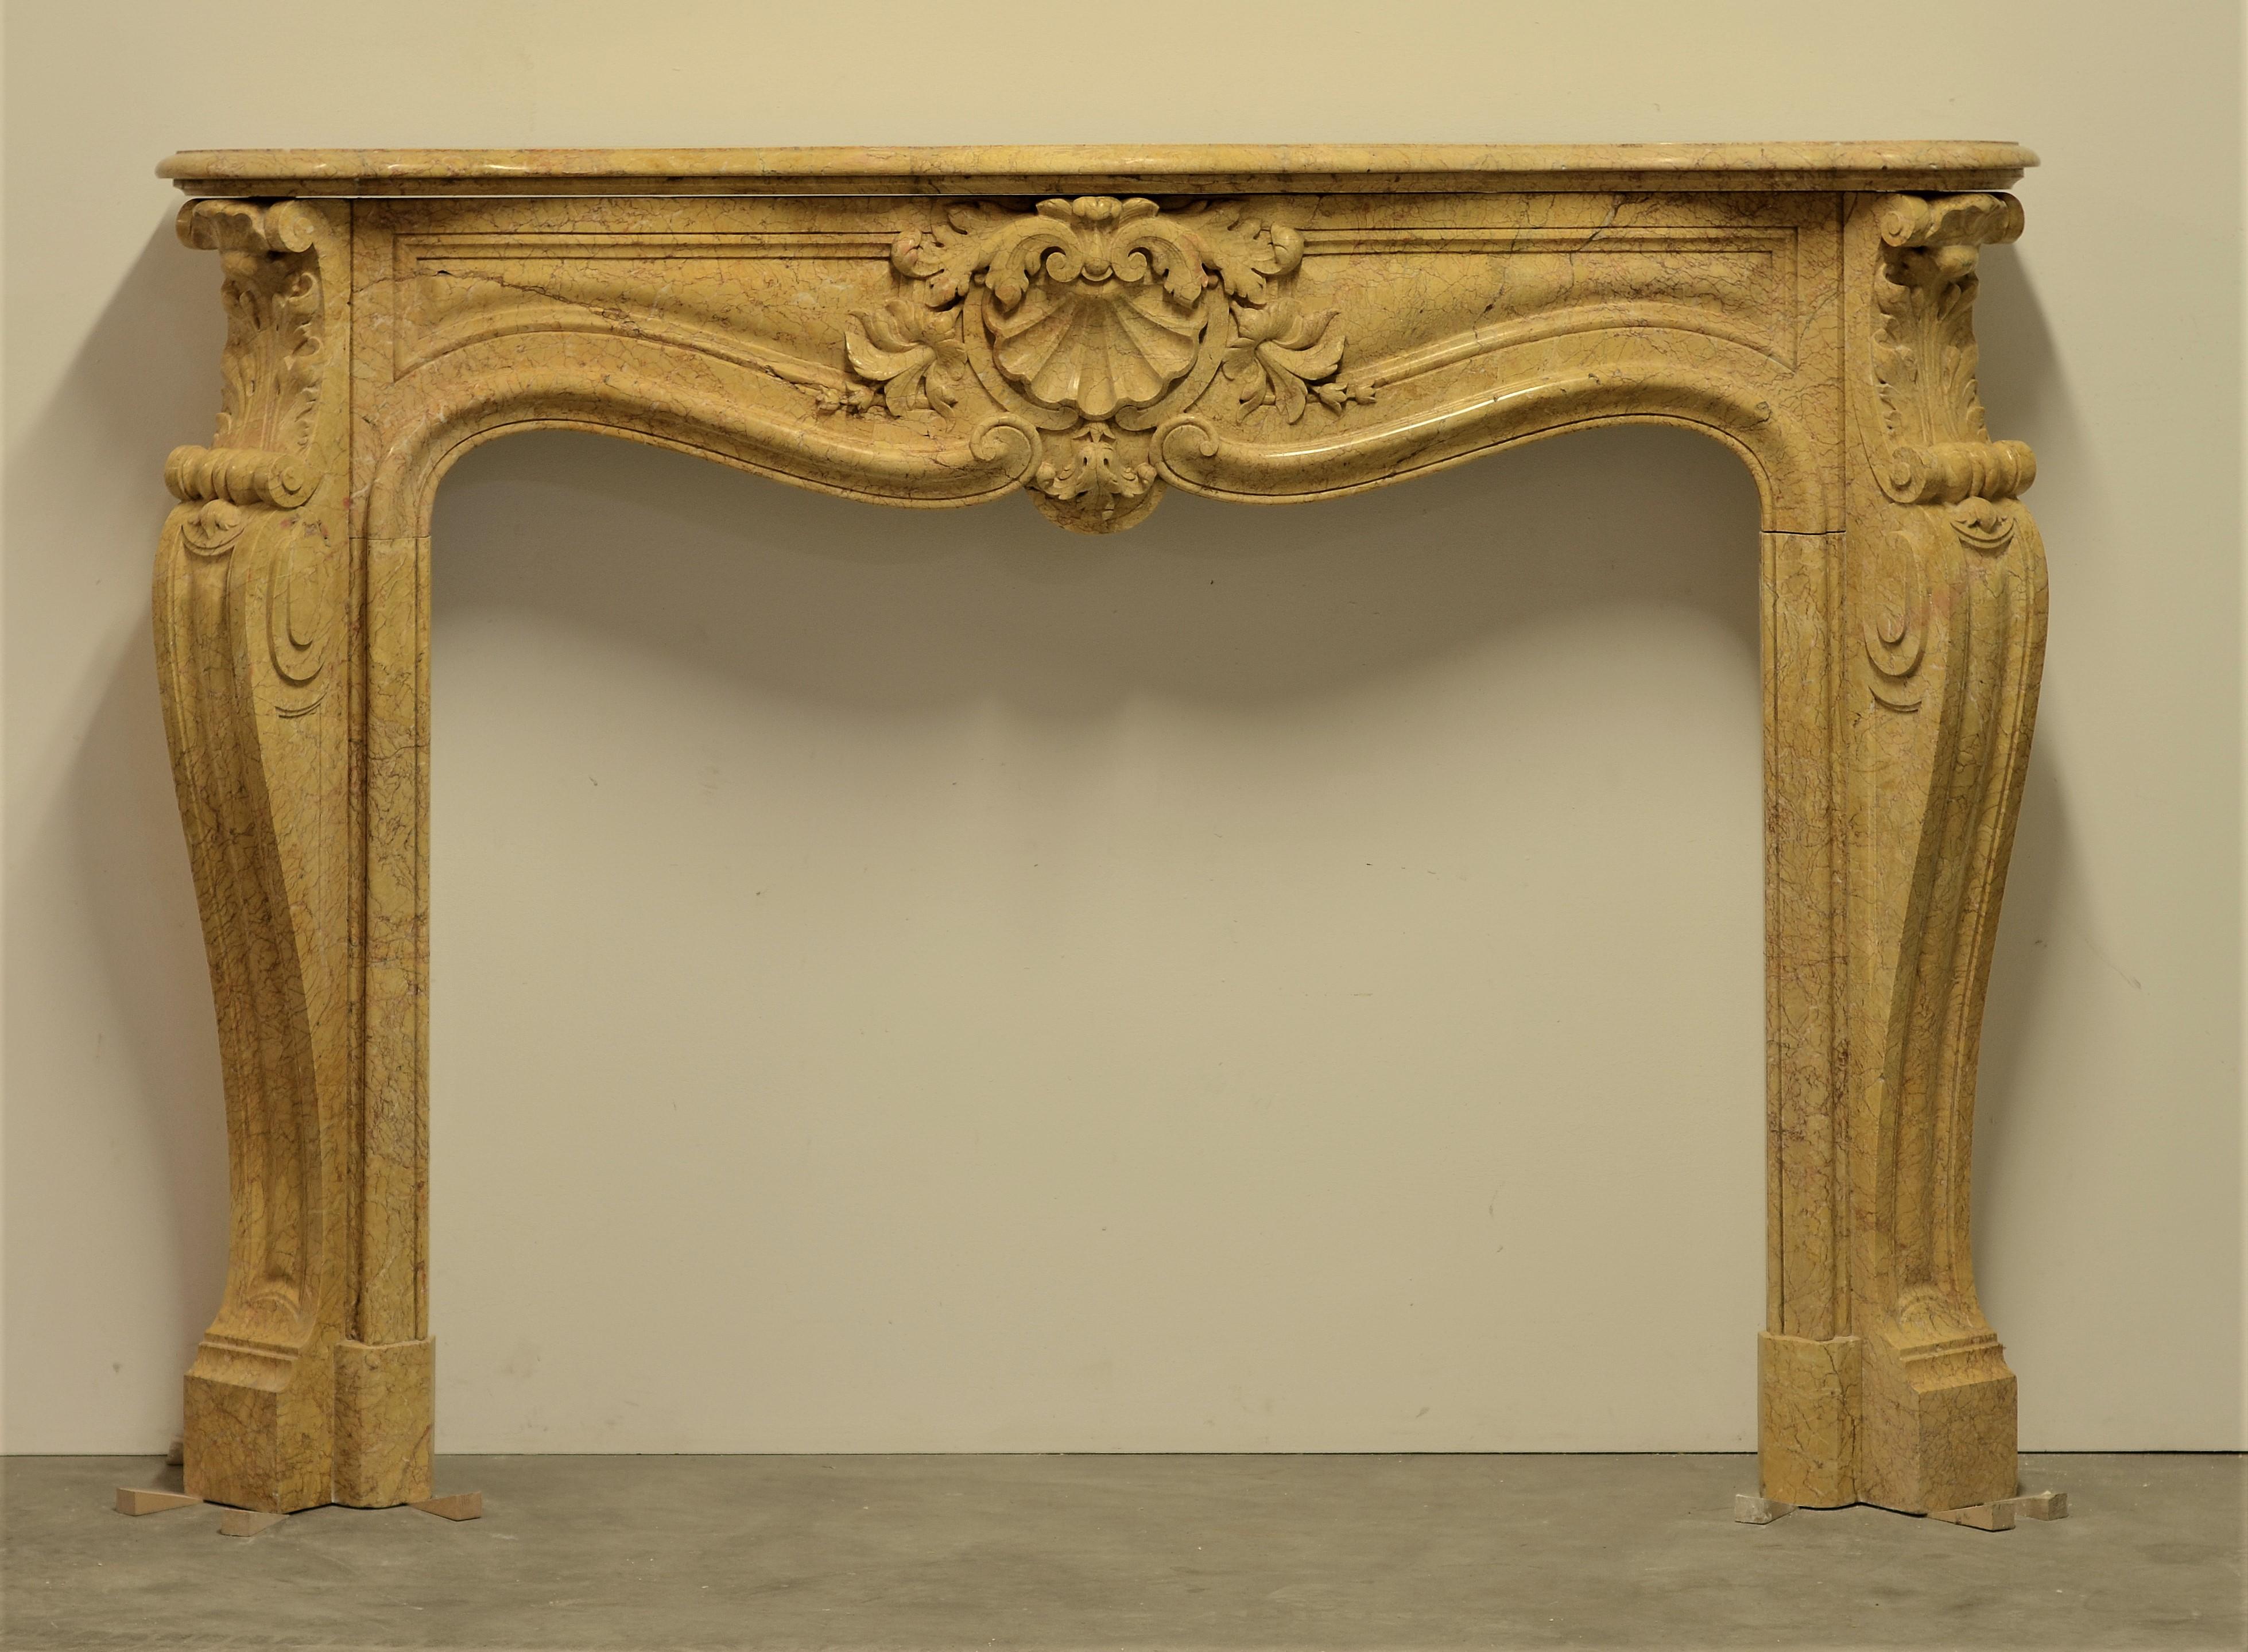 Impressive and well carved French Louis XV in Jeanne de Brignole marble.
The 19th century mantel is beautifully heavy florally decorated thru out.

Minor restorations, non original sides.

Sold by Schermerhorn antique fireplaces
Our vast